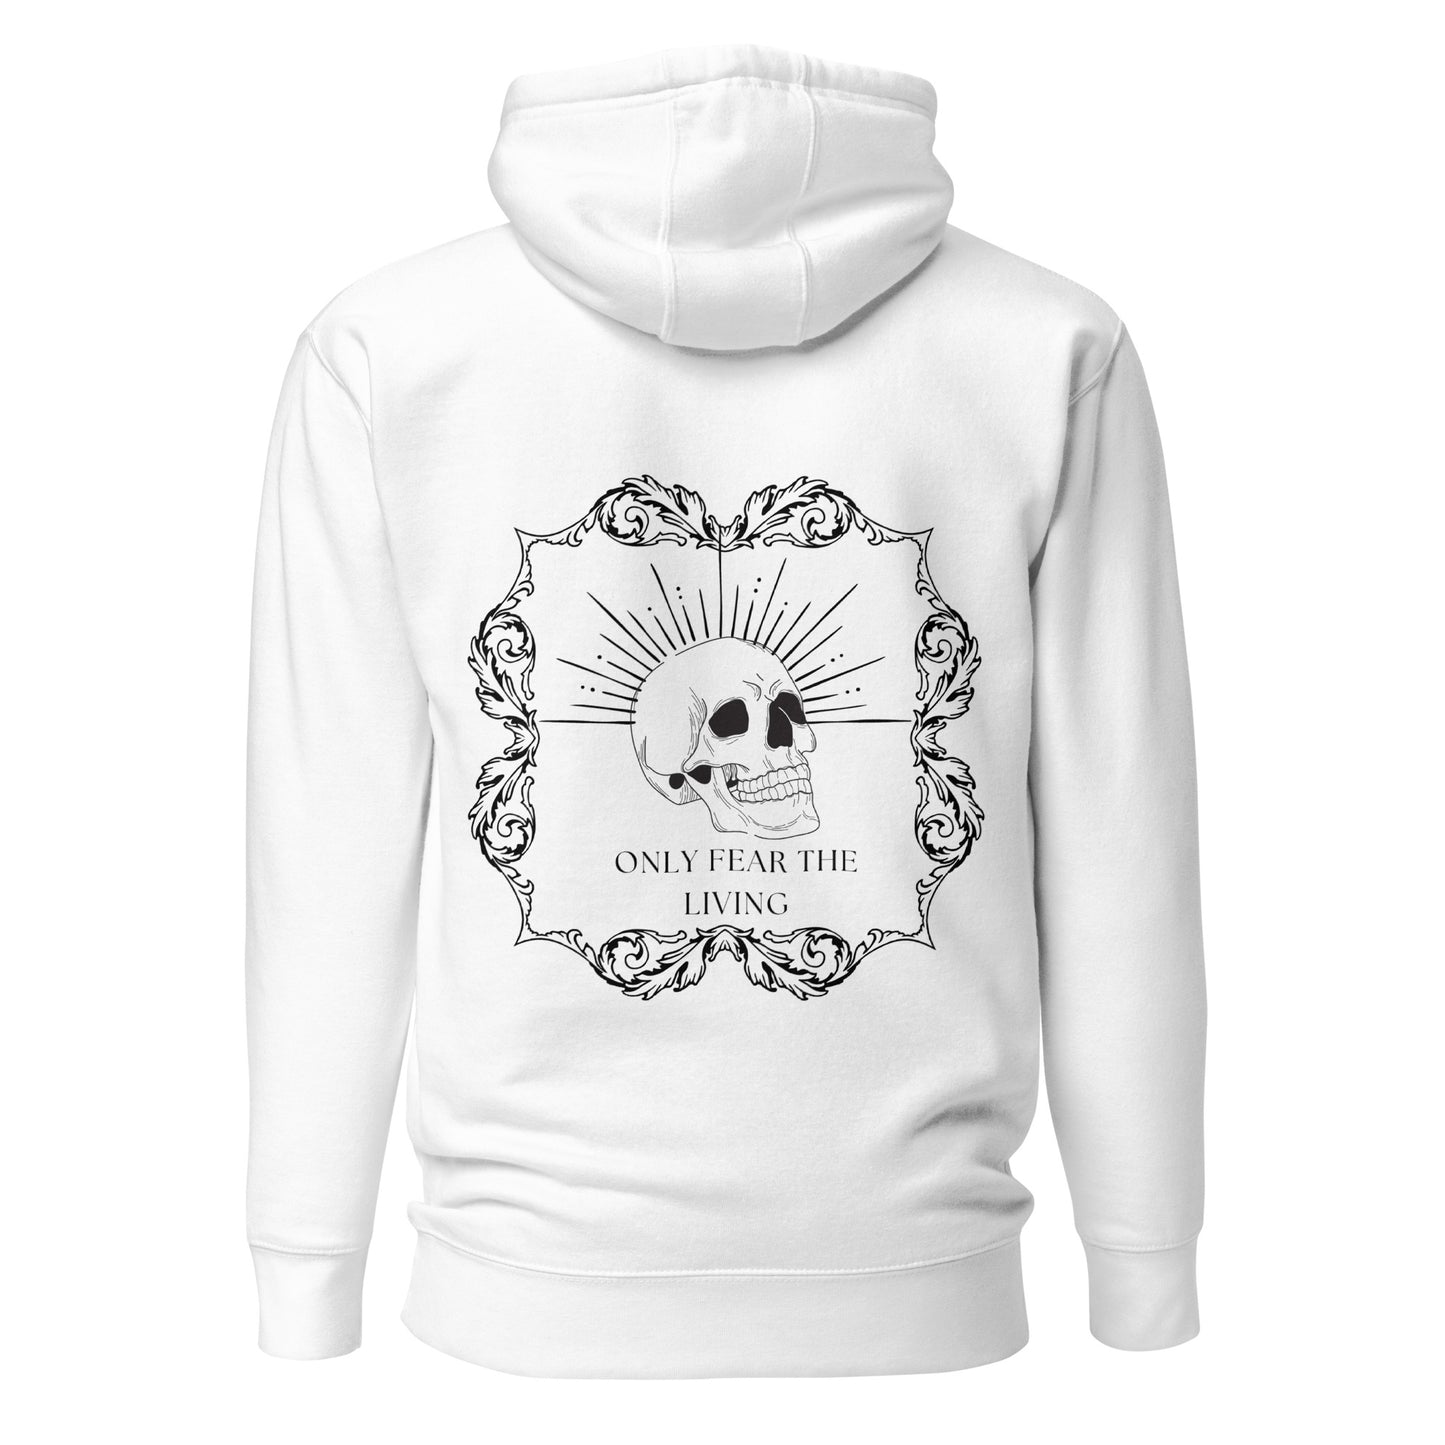 Only fear the living (skull) Unisex Hoodie